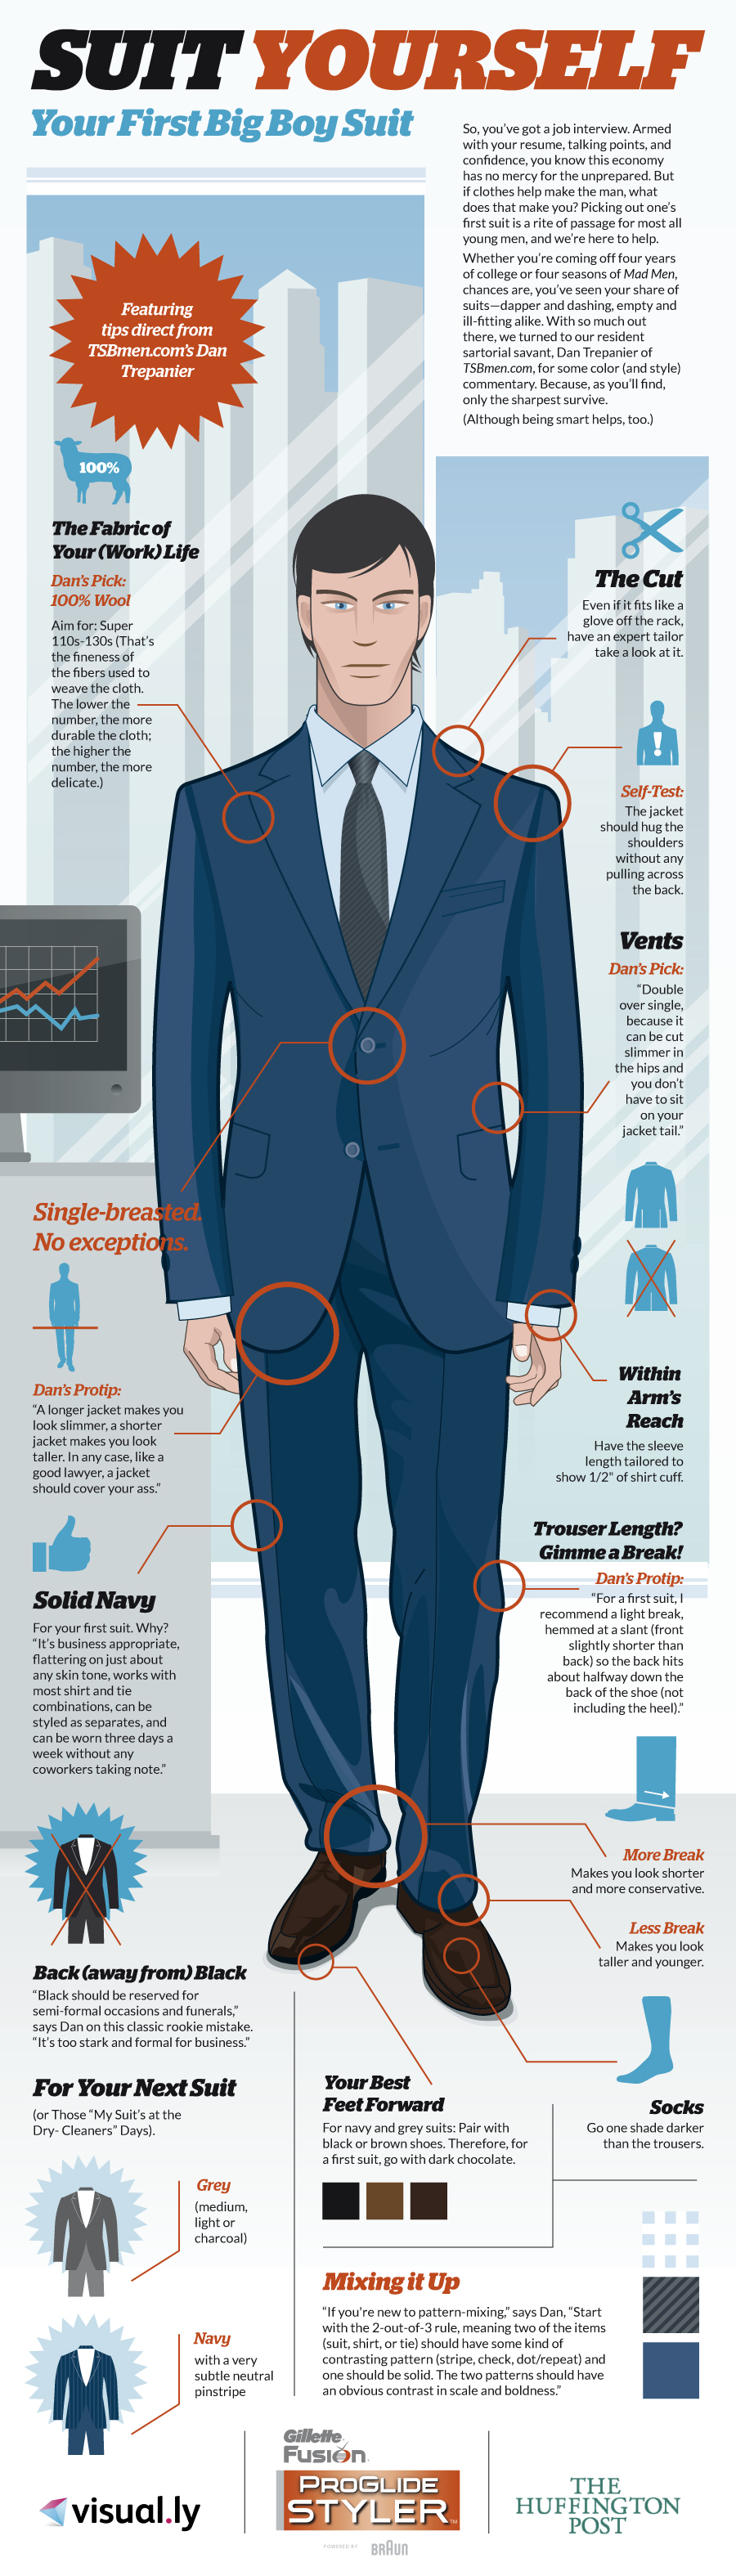 Suit Yourself: Your First Big Boy Suit